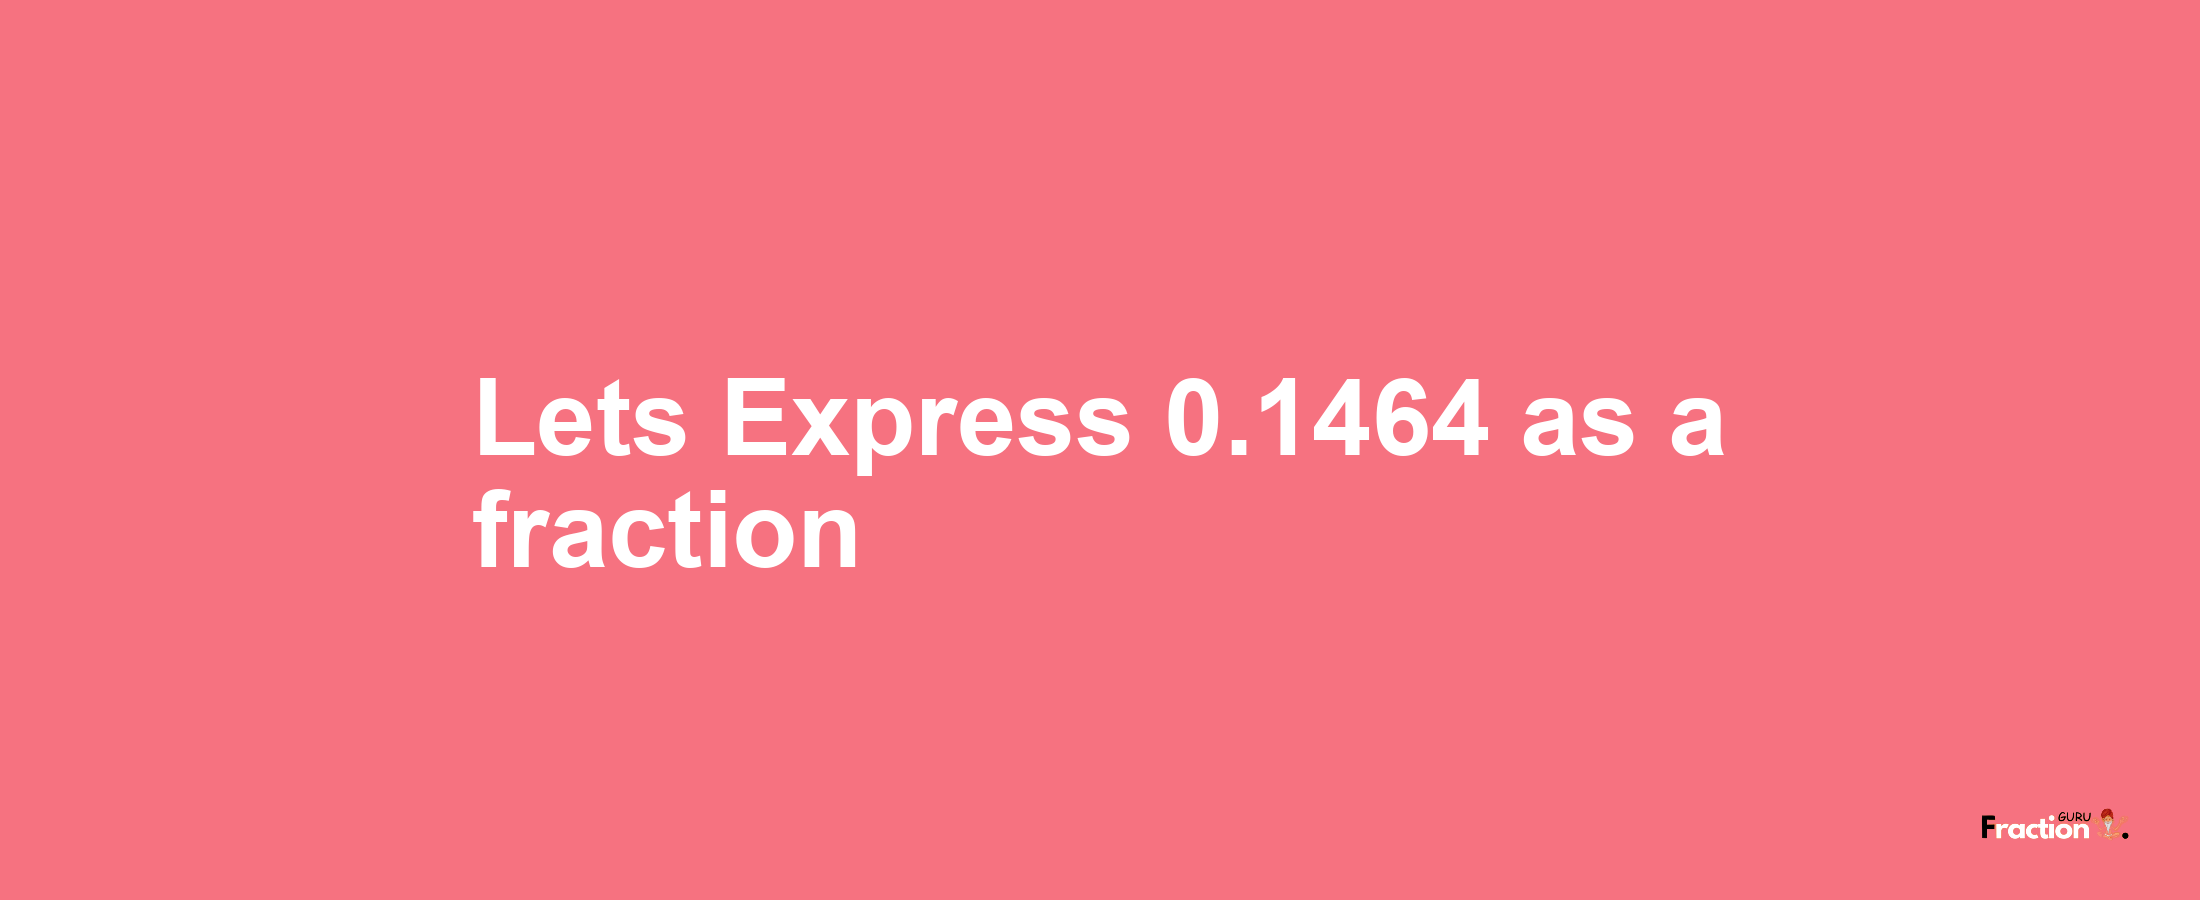 Lets Express 0.1464 as afraction